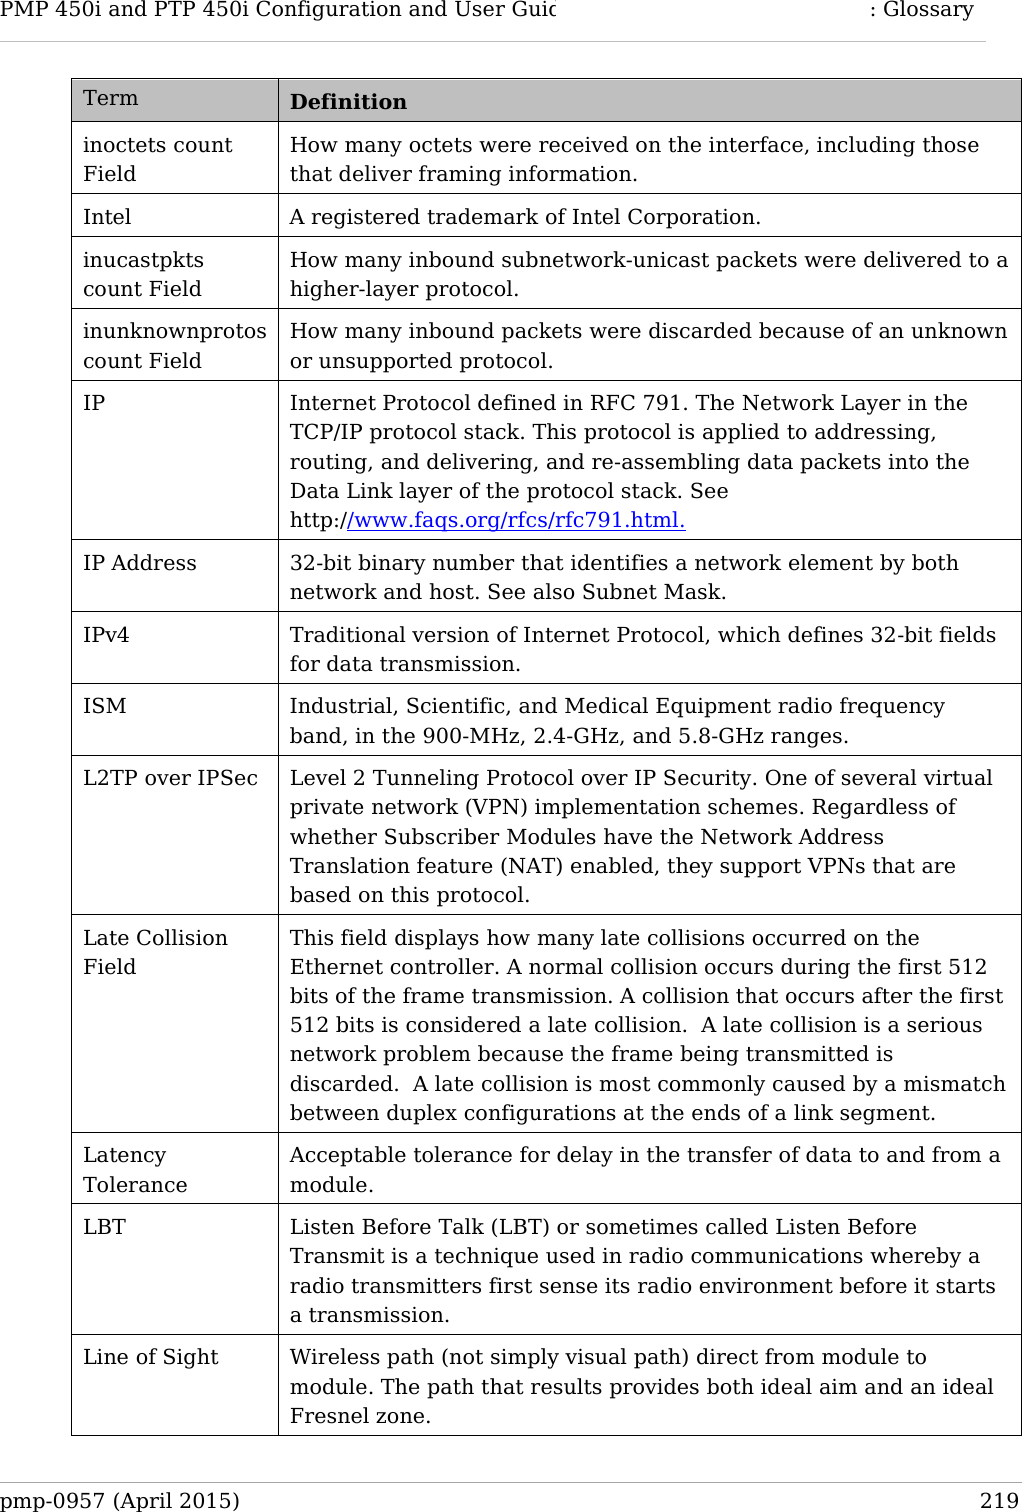 PMP 450i and PTP 450i Configuration and User Guid  : Glossary  Term Definition inoctets count Field How many octets were received on the interface, including those that deliver framing information. Intel A registered trademark of Intel Corporation. inucastpkts count Field How many inbound subnetwork-unicast packets were delivered to a higher-layer protocol. inunknownprotos count Field How many inbound packets were discarded because of an unknown or unsupported protocol. IP Internet Protocol defined in RFC 791. The Network Layer in the TCP/IP protocol stack. This protocol is applied to addressing, routing, and delivering, and re-assembling data packets into the Data Link layer of the protocol stack. See http://www.faqs.org/rfcs/rfc791.html. IP Address 32-bit binary number that identifies a network element by both network and host. See also Subnet Mask. IPv4 Traditional version of Internet Protocol, which defines 32-bit fields for data transmission. ISM Industrial, Scientific, and Medical Equipment radio frequency band, in the 900-MHz, 2.4-GHz, and 5.8-GHz ranges. L2TP over IPSec Level 2 Tunneling Protocol over IP Security. One of several virtual private network (VPN) implementation schemes. Regardless of whether Subscriber Modules have the Network Address Translation feature (NAT) enabled, they support VPNs that are based on this protocol. Late Collision Field This field displays how many late collisions occurred on the Ethernet controller. A normal collision occurs during the first 512 bits of the frame transmission. A collision that occurs after the first 512 bits is considered a late collision.  A late collision is a serious network problem because the frame being transmitted is discarded.  A late collision is most commonly caused by a mismatch between duplex configurations at the ends of a link segment. Latency Tolerance Acceptable tolerance for delay in the transfer of data to and from a module. LBT Listen Before Talk (LBT) or sometimes called Listen Before Transmit is a technique used in radio communications whereby a radio transmitters first sense its radio environment before it starts a transmission. Line of Sight Wireless path (not simply visual path) direct from module to module. The path that results provides both ideal aim and an ideal Fresnel zone. pmp-0957 (April 2015)   219  